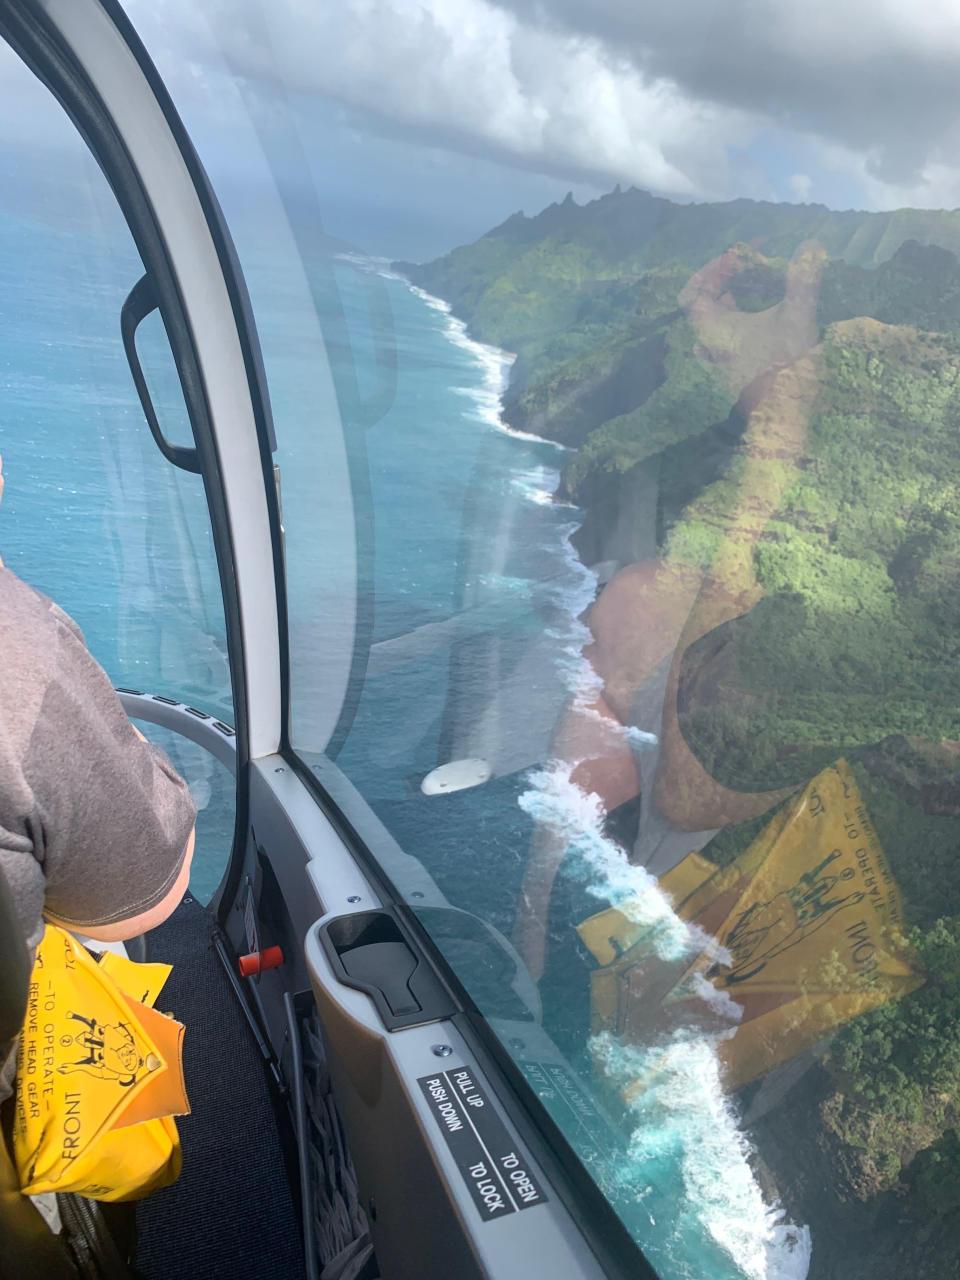 FILE - This Dec. 17, 2019 file photo shows the Na Pali Coast on the island of Kauai in Hawaii. The small, tight-knit community of about 72,000 people on Kauai spent the first seven months of the pandemic mostly COVID-free. Then in October, statewide travel restrictions eased and the pandemic came pouring in. (AP Photo/Maryclaire Dale, File)